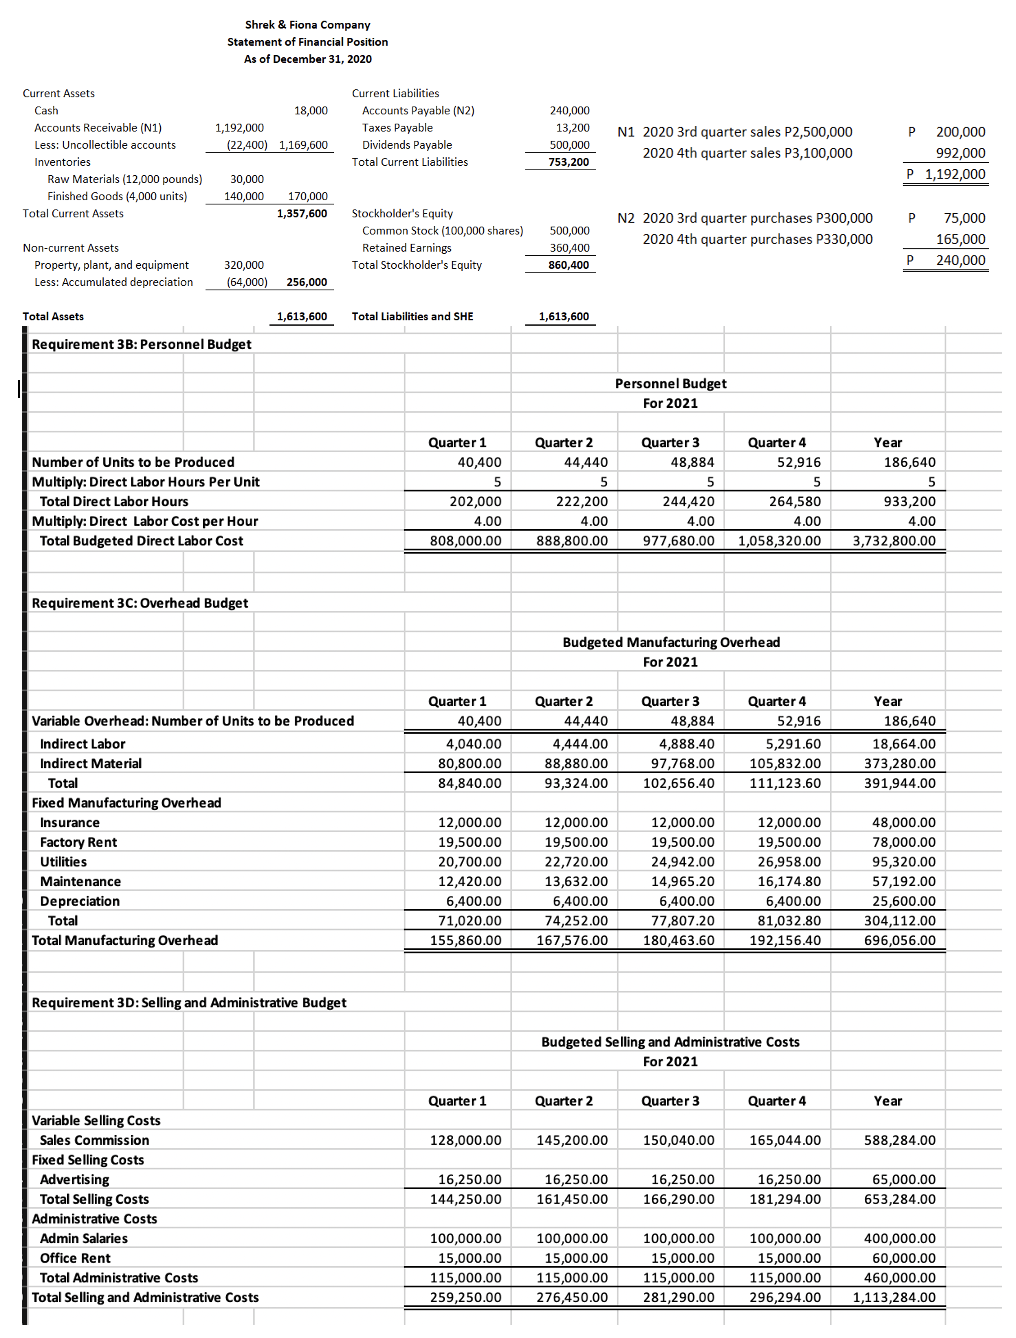 Shrek & Fiona Company
Statement of Financial Position
As of December 31, 2020
Current Assets
Current Liabilities
Cash
18,000
Accounts Payable (N2)
240,000
Accounts Receivable (N1)
Less: Uncollectible accounts
13,200
500,000
1,192,000
Taxes Payable
N1 2020 3rd quarter sales P2,500,000
P 200,000
(22,400) 1,169,600
Dividends Payable
2020 4th quarter sales P3,100,000
992,000
Inventories
Total Current Liabilities
753,200
P 1,192,000
Raw Materials (12,000 pounds)
30,000
Finished Goods (4,000 units)
140,000
170,000
Total Current Assets
1,357,600
Stockholder's Equity
75,000
165,000
240,000
N2 2020 3rd quarter purchases P300,000
Common Stock (100,000 shares)
Retained Earnings
500,000
2020 4th quarter purchases P330,000
Non-current Assets
360,400
Property, plant, and equipment
320,000
Total Stockholder's Equity
860,400
Less: Accumulated depreciation
(64,000)
256.000
Total Assets
1,613,600
Total Liabilities and SHE
1,613,600
Requirement 3B: Personnel Budget
Personnel Budget
For 2021
Quarter 1
Quarter 2
Quarter 3
Quarter 4
Year
Number of Units to be Produced
40,400
44,440
48,884
52,916
186,640
Multiply: Direct Labor Hours Per Unit
5
5
5
Total Direct Labor Hours
202,000
222,200
244,420
264,580
933,200
Multiply: Direct Labor Cost per Hour
4.00
4.00
4.00
4.00
4.00
Total Budgeted Direct Labor Cost
808,000.00
888,800.00
977,680.00
1,058,320.00
3,732,800.00
Requirement 3C: Overhead Budget
Budgeted Manufacturing Overhead
For 2021
Quarter 1
Quarter 2
Quarter 3
Quarter 4
Year
Variable Overhead: Number of Units to be Produced
40,400
44,440
48,884
52,916
186,640
Indirect Labor
4,040.00
4,444.00
4,888.40
5,291.60
18,664.00
Indirect Material
80,800.00
88,880.00
97,768.00
105,832.00
373,280.00
Total
84,840.00
93,324.00
102,656.40
111,123.60
391,944.00
Fixed Manufacturing Overhead
Insurance
12,000.00
12,000.00
12,000.00
12,000.00
48,000.00
Factory Rent
19,500.00
19,500.00
19,500.00
19,500.00
78,000.00
22,720.00
13,632.00
26,958.00
16,174.80
Utilities
20,700.00
24,942.00
95,320.00
Maintenance
12,420.00
14,965.20
57,192.00
Depreciation
6,400.00
6,400.00
6,400.00
6,400.00
25,600.00
Total
71,020.00
74,252.00
77,807.20
81,032.80
304,112.00
Total Manufacturing Overhead
155,860.00
167,576.00
180,463.60
192,156.40
696,056.00
Requirement 3D: Selling and Administrative Budget
Budgeted Selling and Administrative Costs
For 2021
Quarter 1
Quarter 2
Quarter 3
Quarter 4
Year
Variable Selling Costs
Sales Commission
128,000.00
145,200.00
150,040.00
165,044.00
588,284.00
Fixed Selling Costs
Advertising
16,250.00
16,250.00
16,250.00
16,250.00
65,000.00
Total Selling Costs
144,250.00
161,450.00
166,290.00
181.294.00
653,284.00
Administrative Costs
Admin Salaries
100,000.00
100,000.00
100,000.00
100,000.00
400,000.00
15,000.00
115,000.00
Office Rent
15,000.00
15,000.00
15,000.00
60,000.00
Total Administrative Costs
115,000.00
115,000.00
115,000.00
460,000.00
Total Selling and Administrative Costs
259,250.00
276,450.00
281,290.00
296,294.00
1,113,284.00
